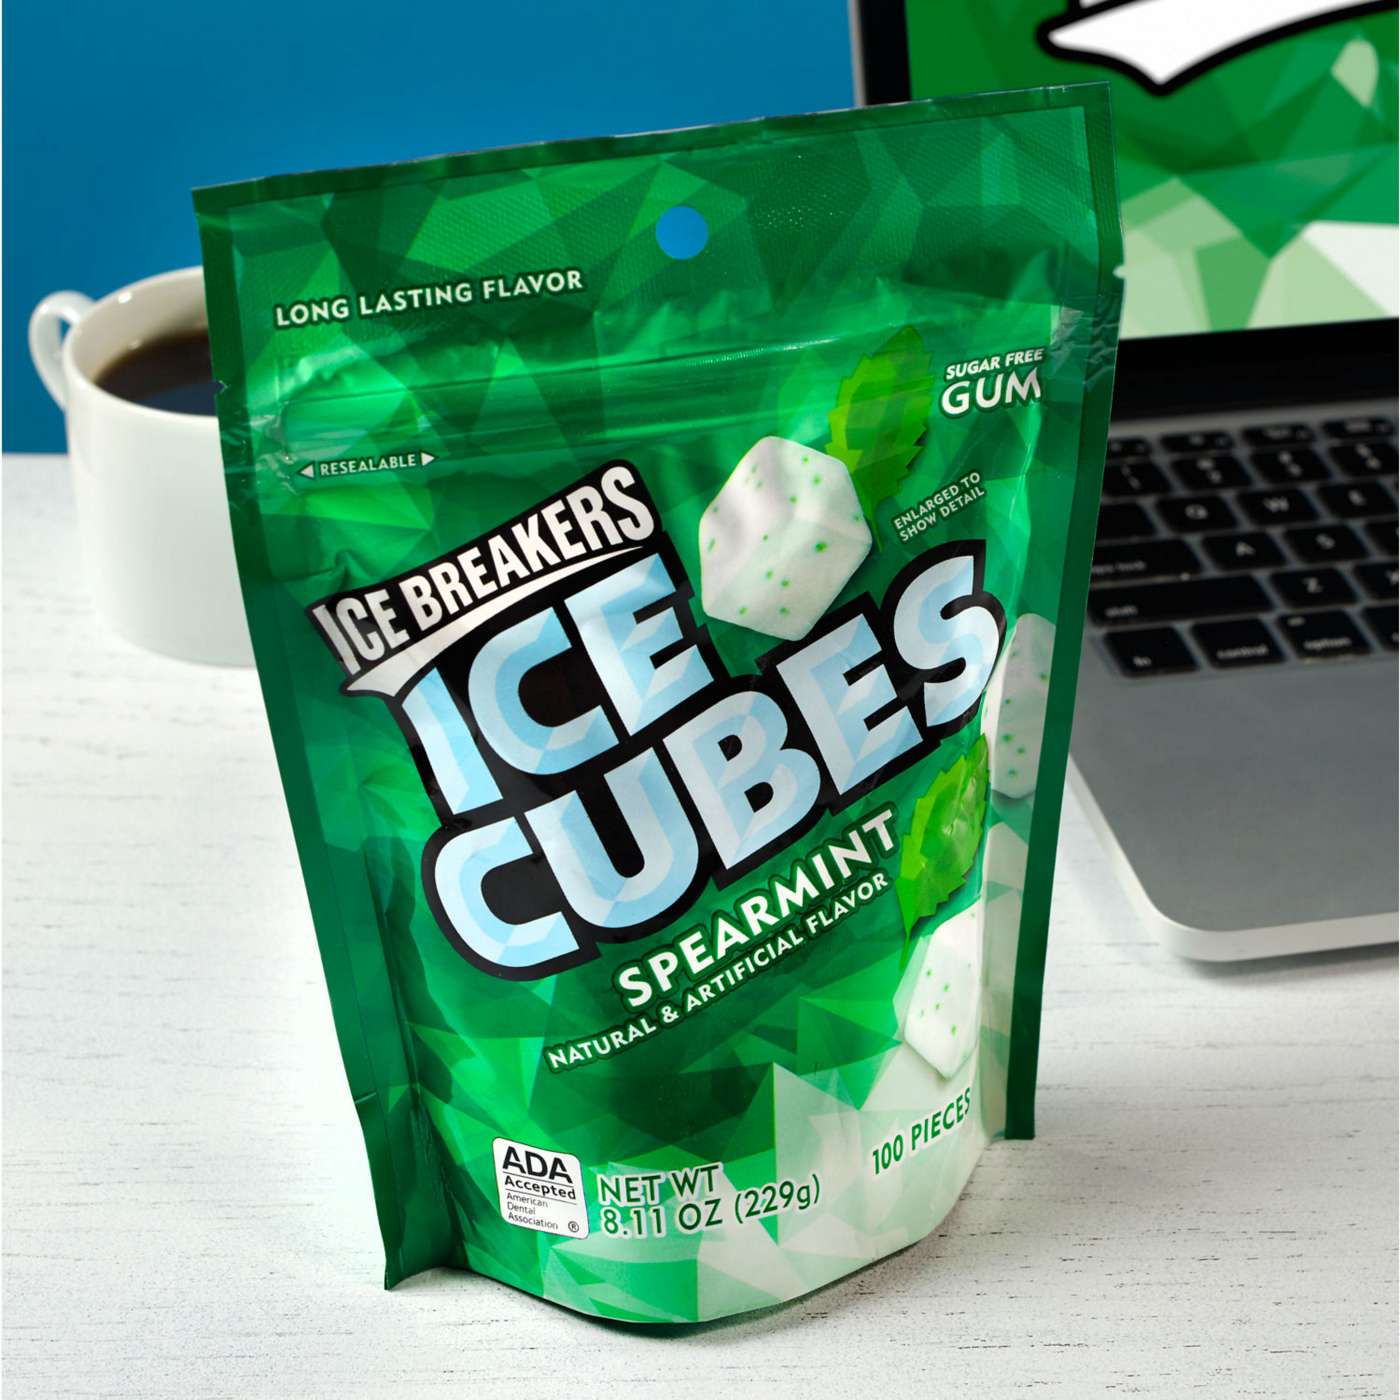 Ice Breakers Ice Cubes Sugar Free Chewing Gum Pouch - Spearmint; image 4 of 4